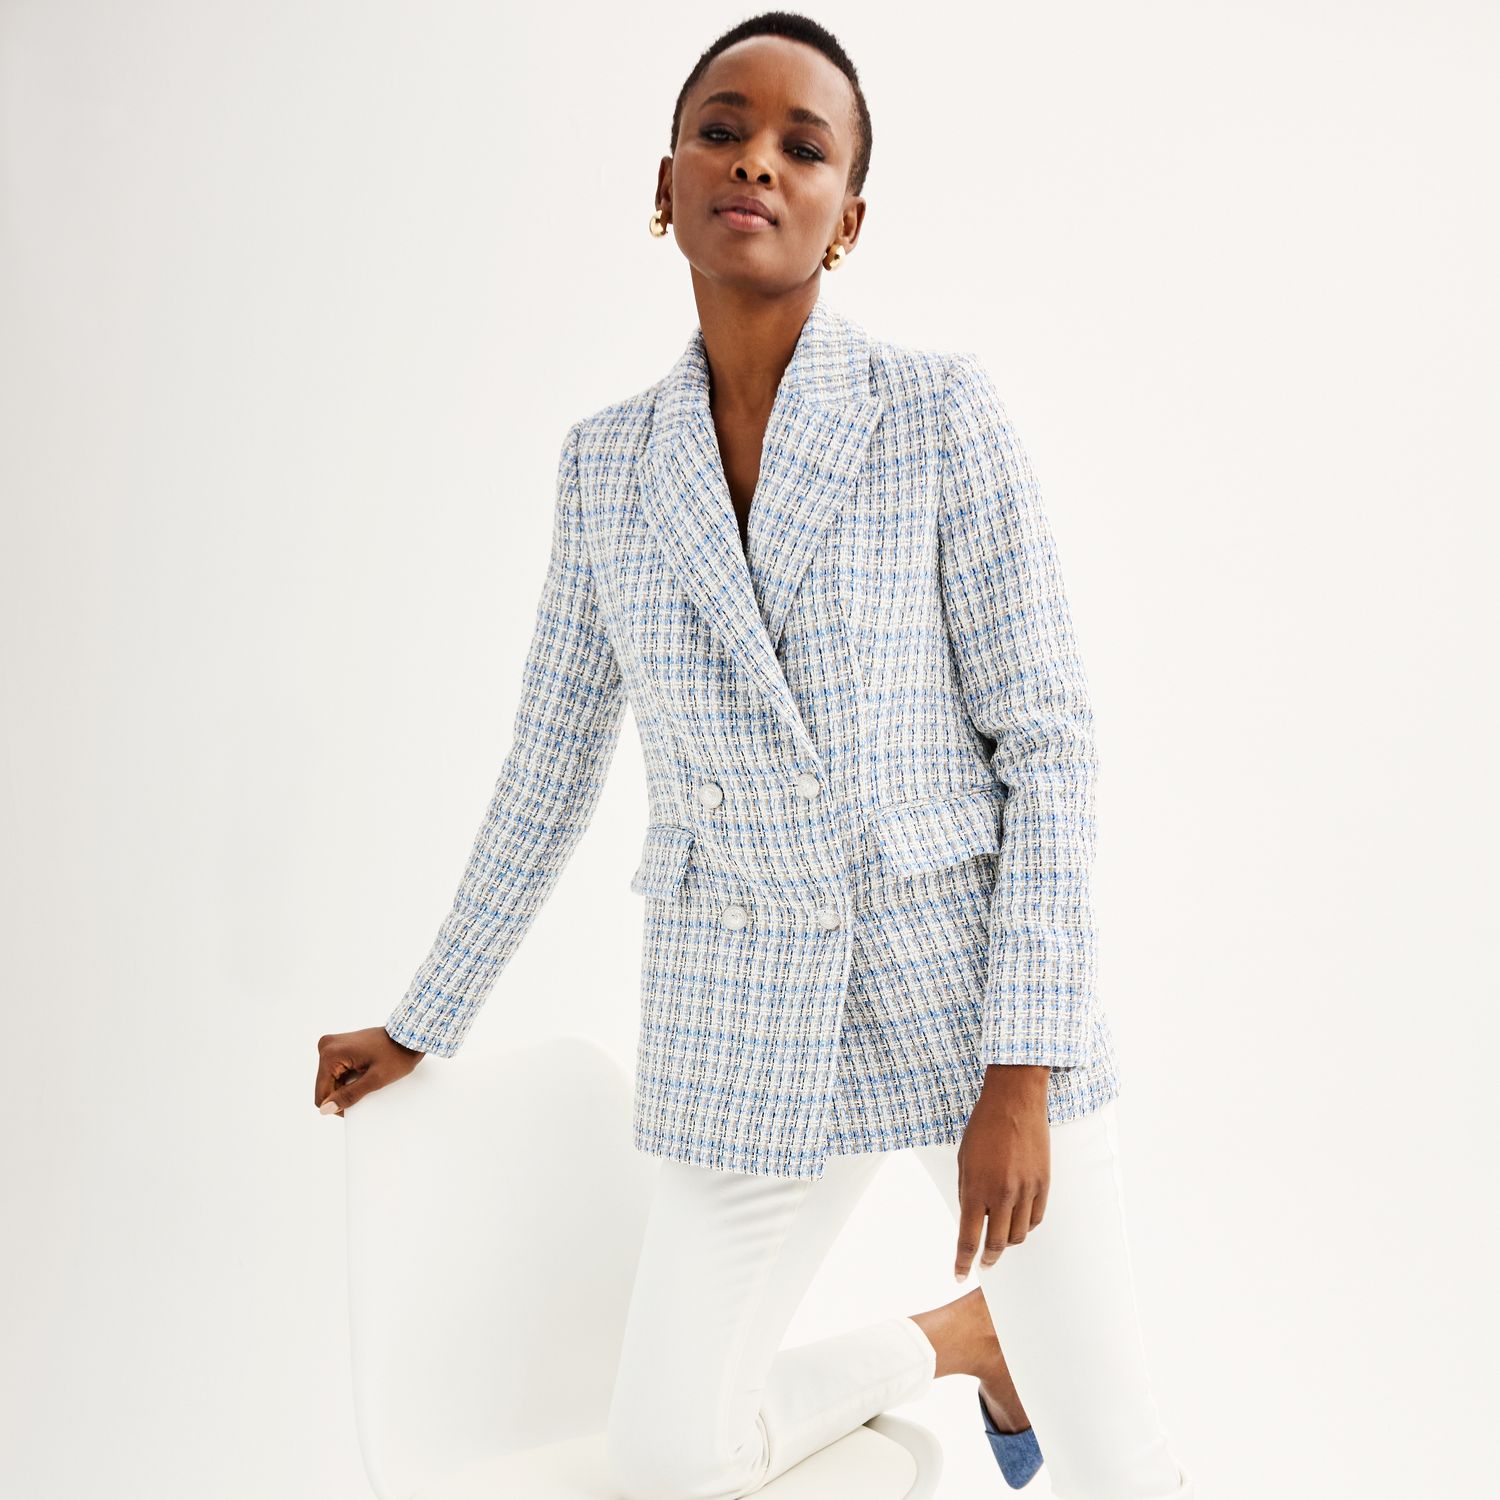 A tweed blazer harkens back to throwback ensembles the are ideal for this trend.